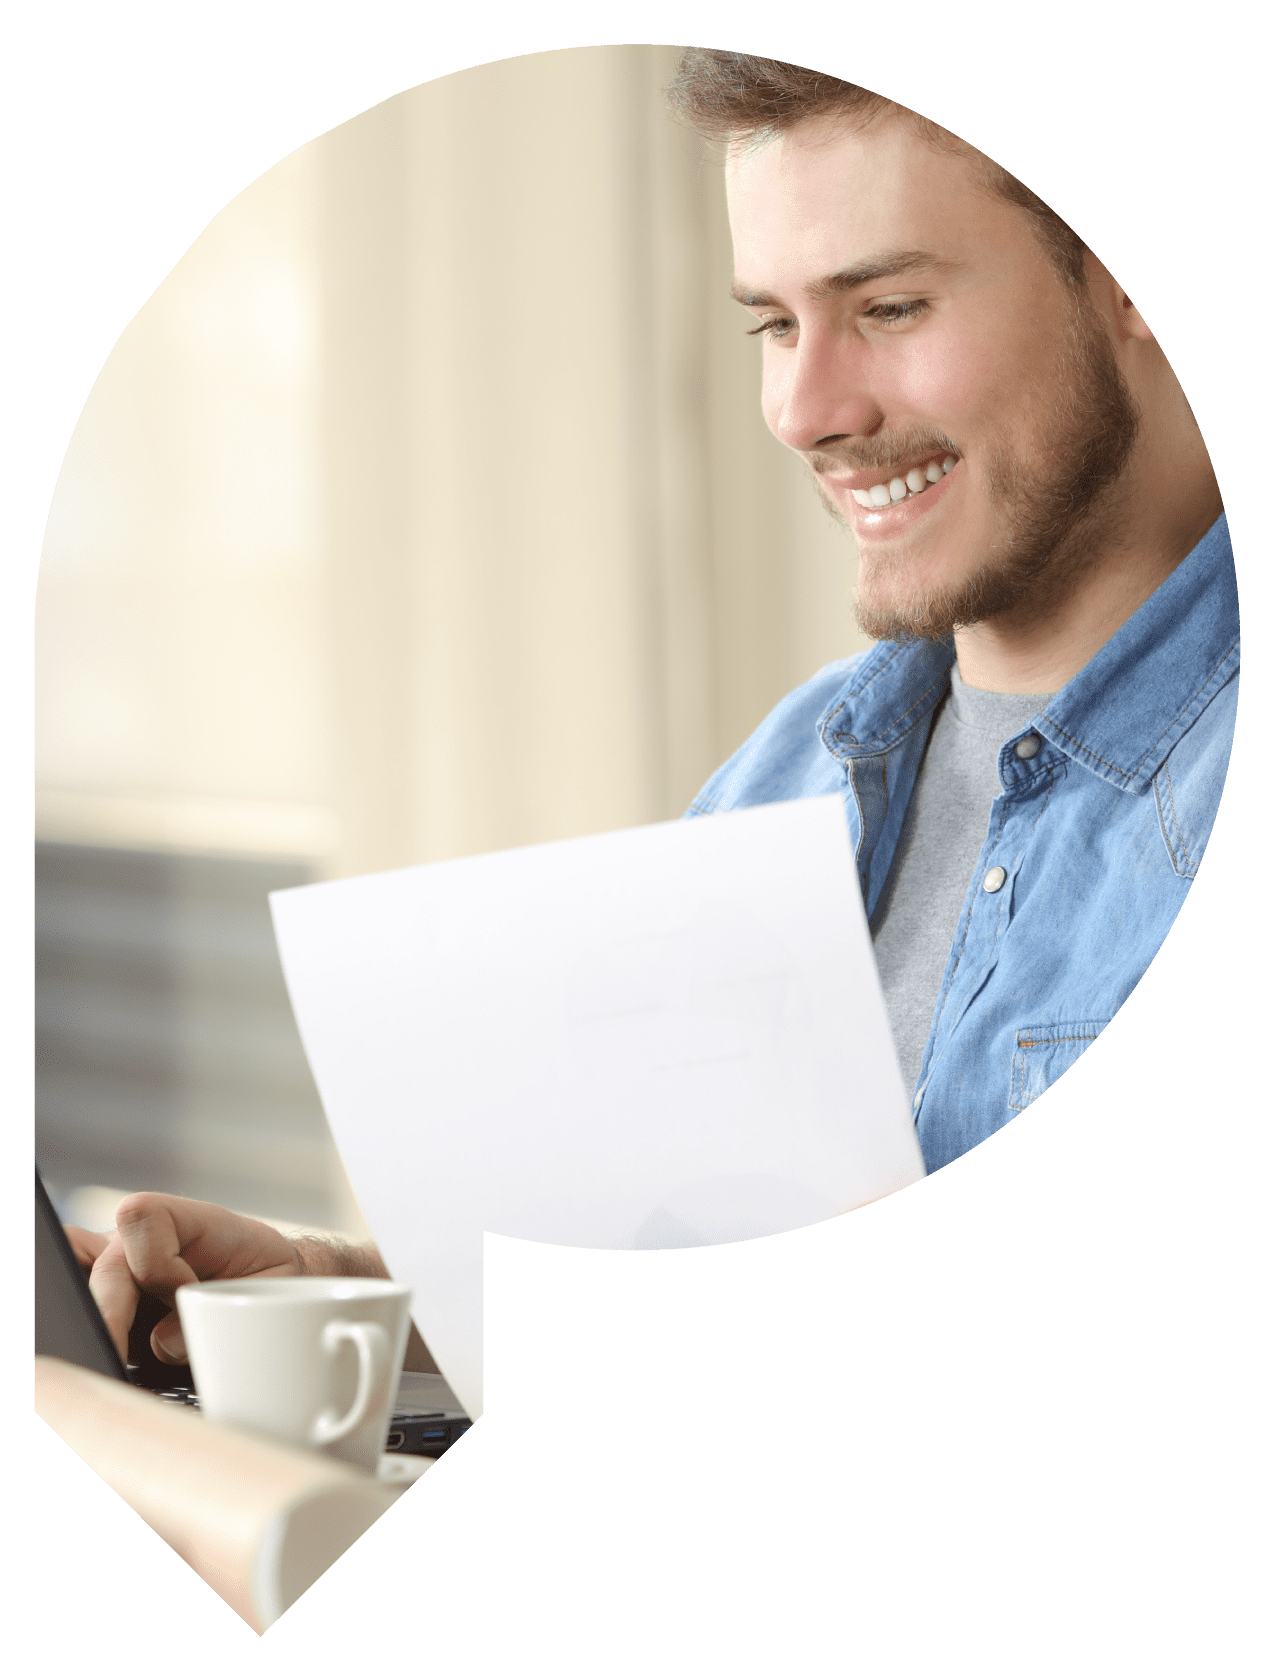 Academic and business proofreading Services